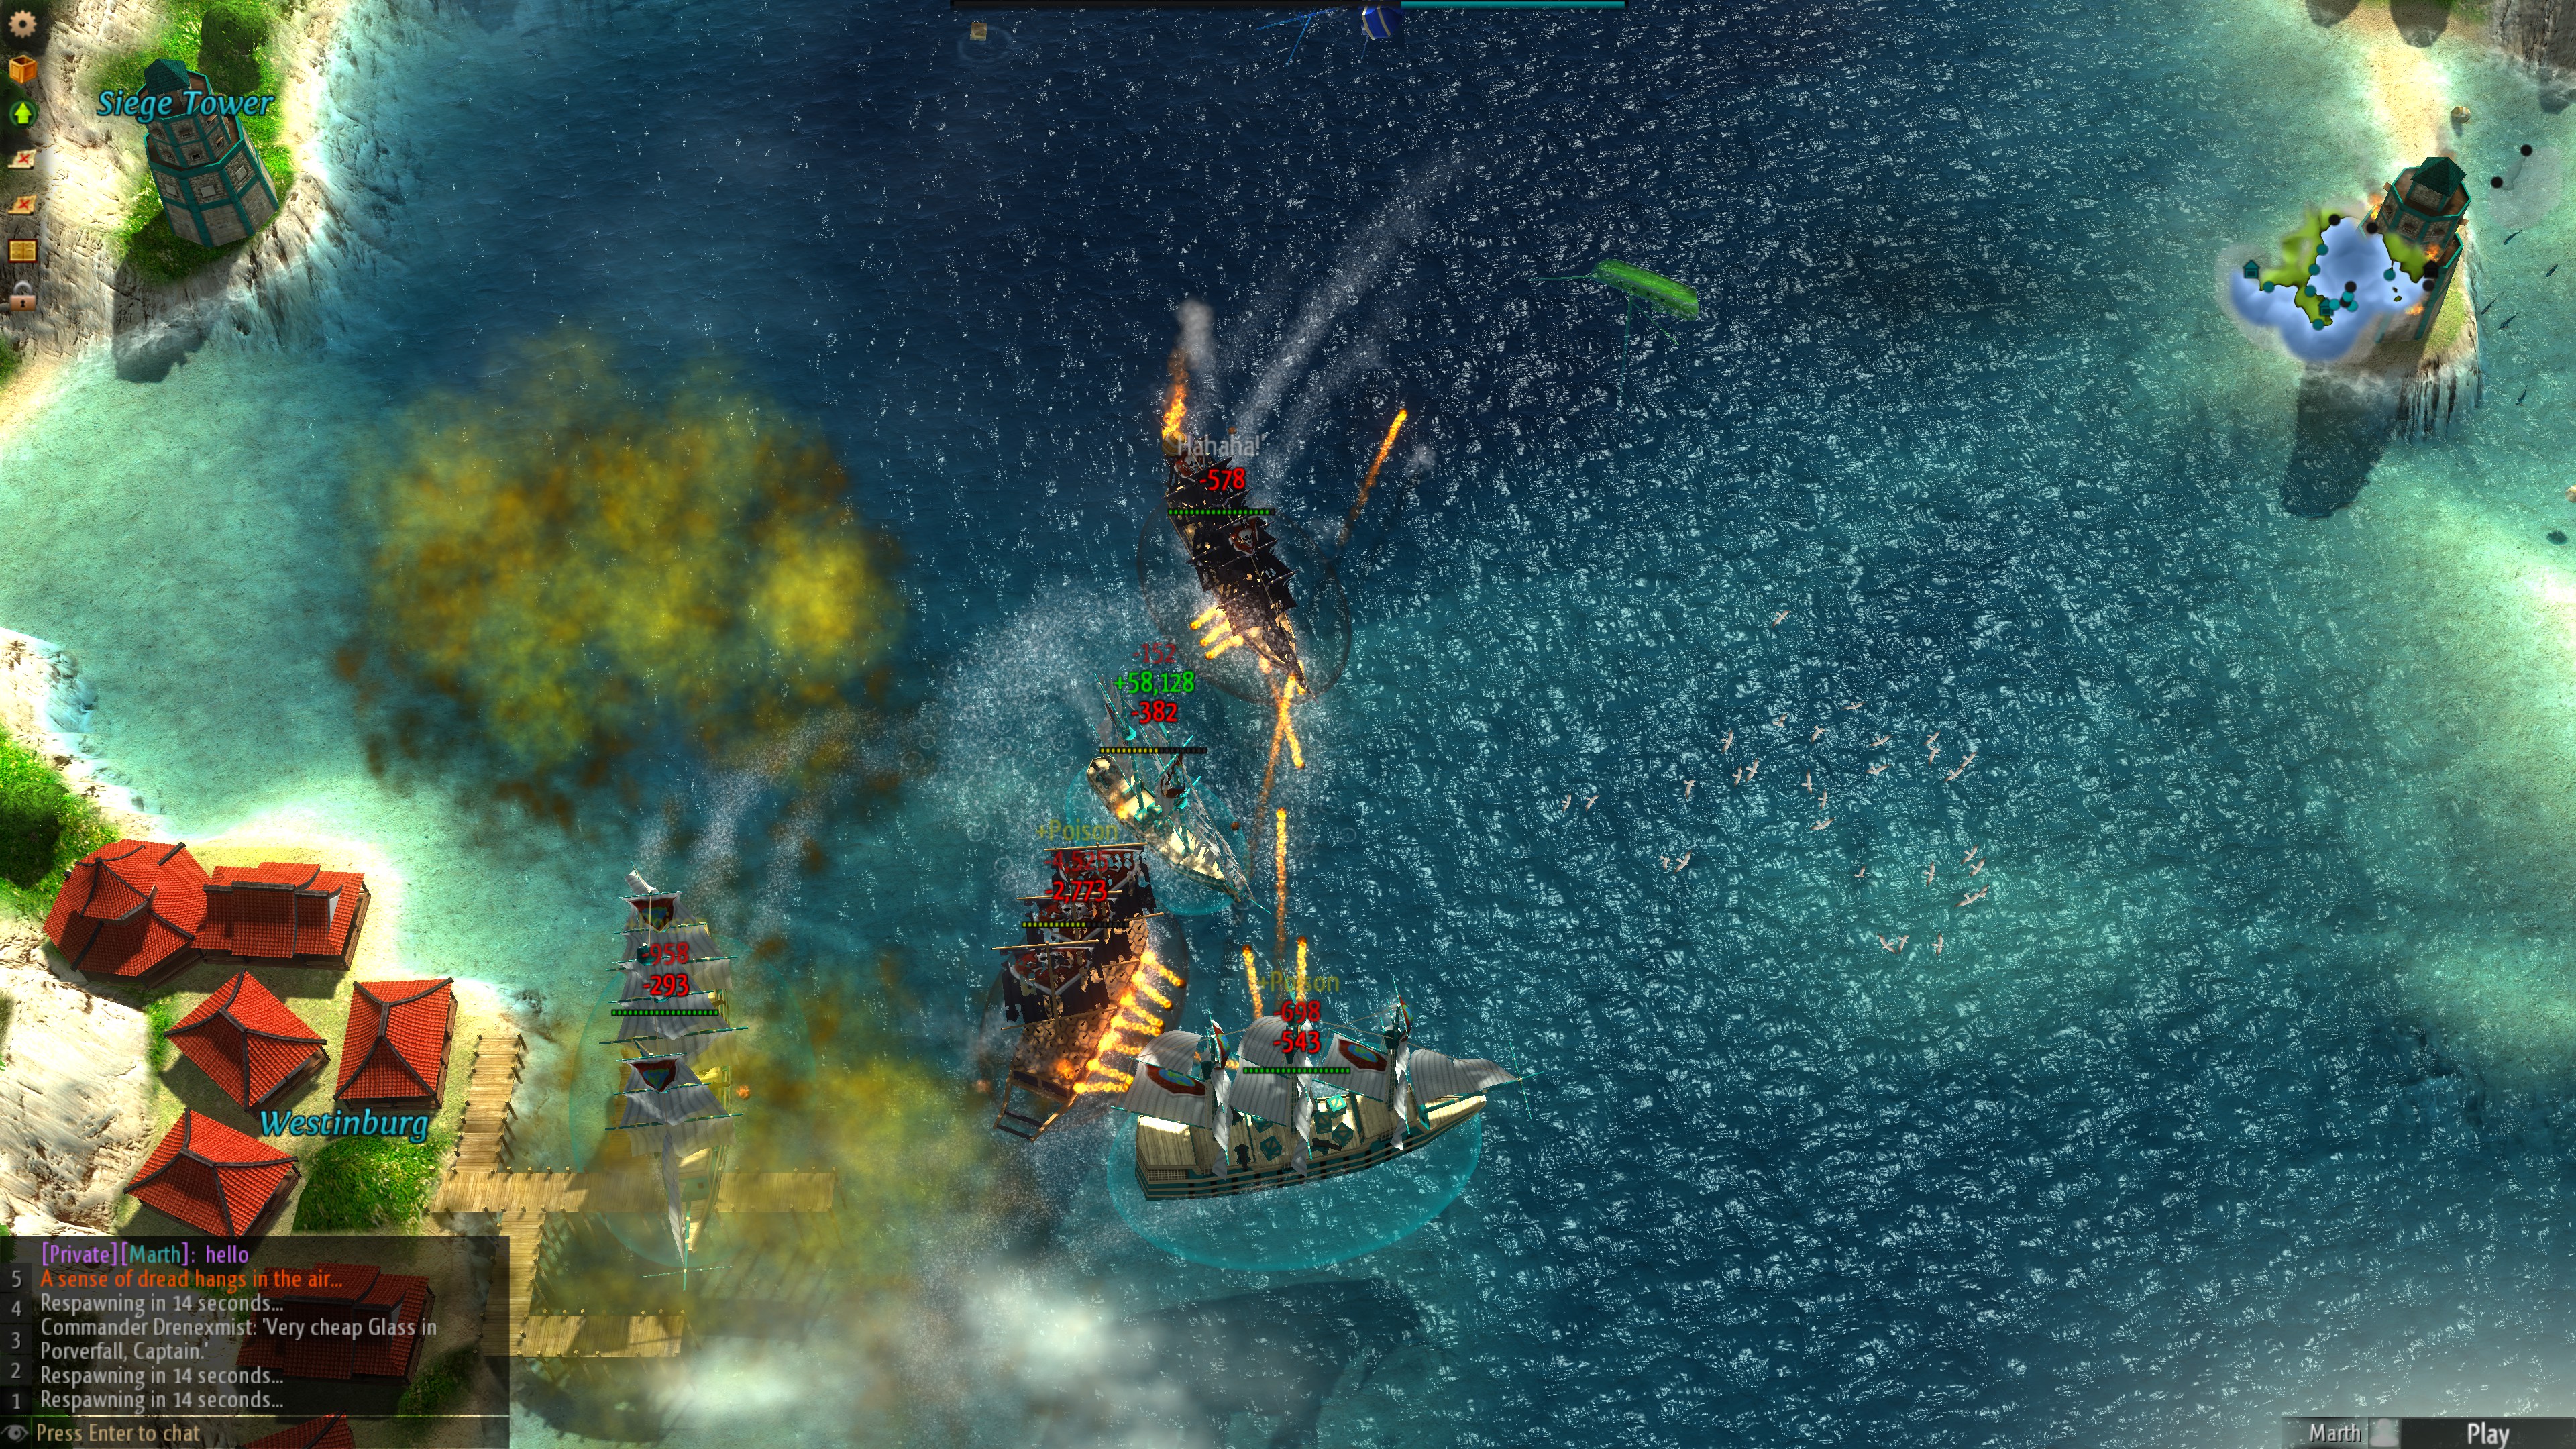 A top-down screenshot of an ocean with some warring pirate ships